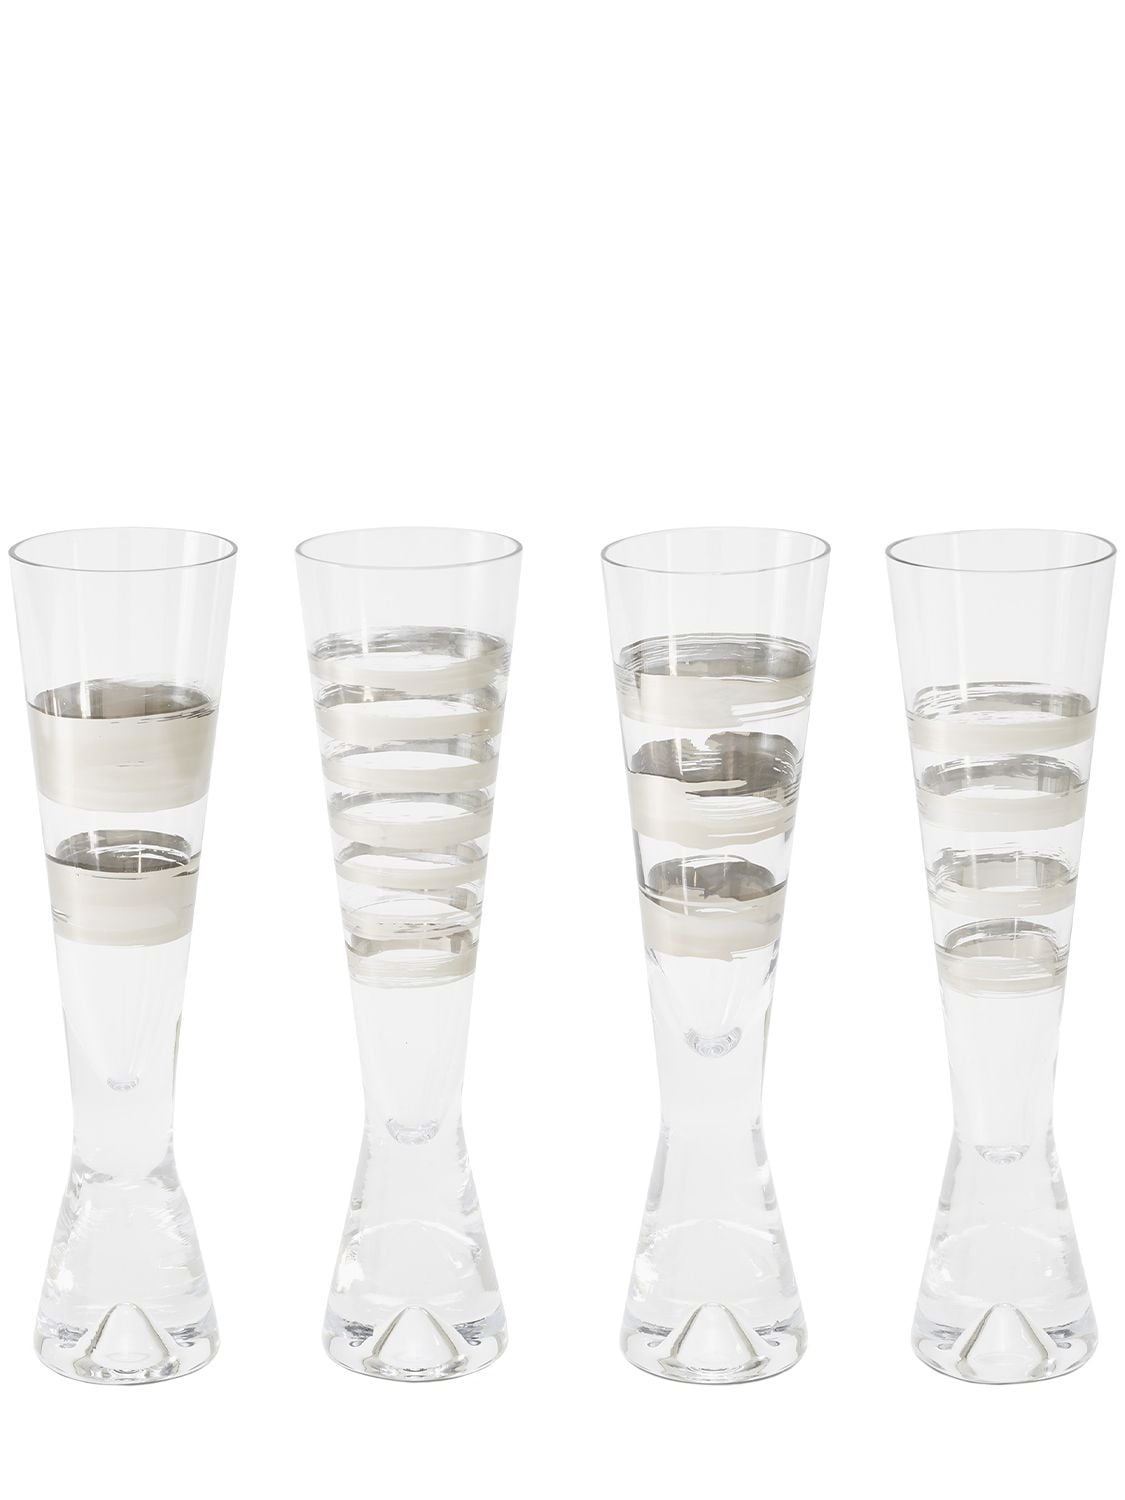 Image of Thank Champagne Glasses Set Of 4